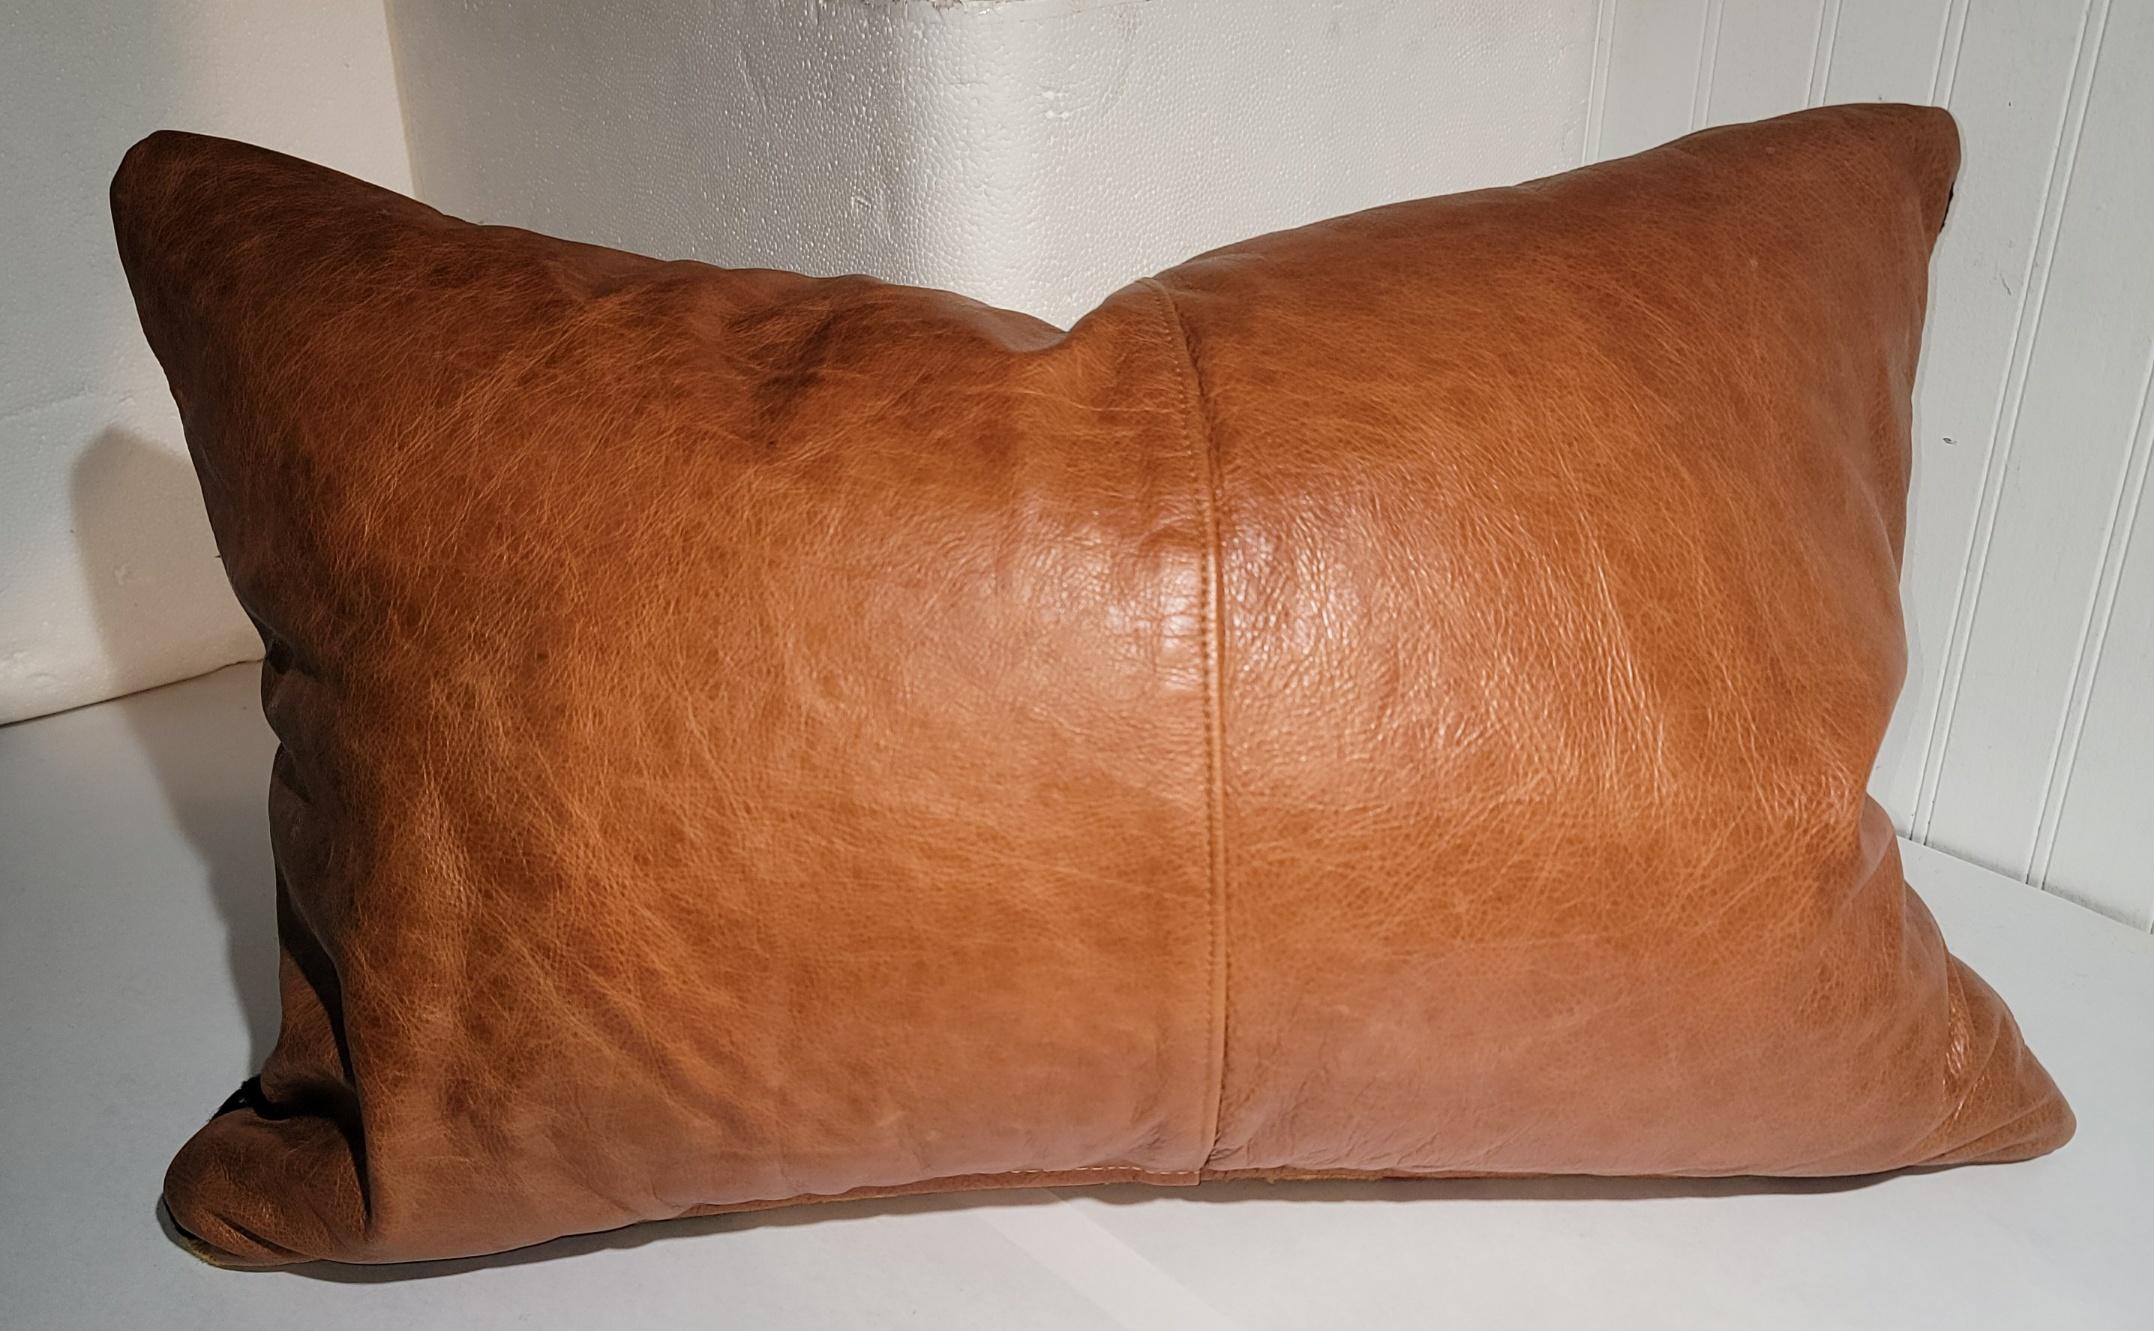 Yei Indian Weaving Pillow W/ Leather Back In Good Condition For Sale In Los Angeles, CA